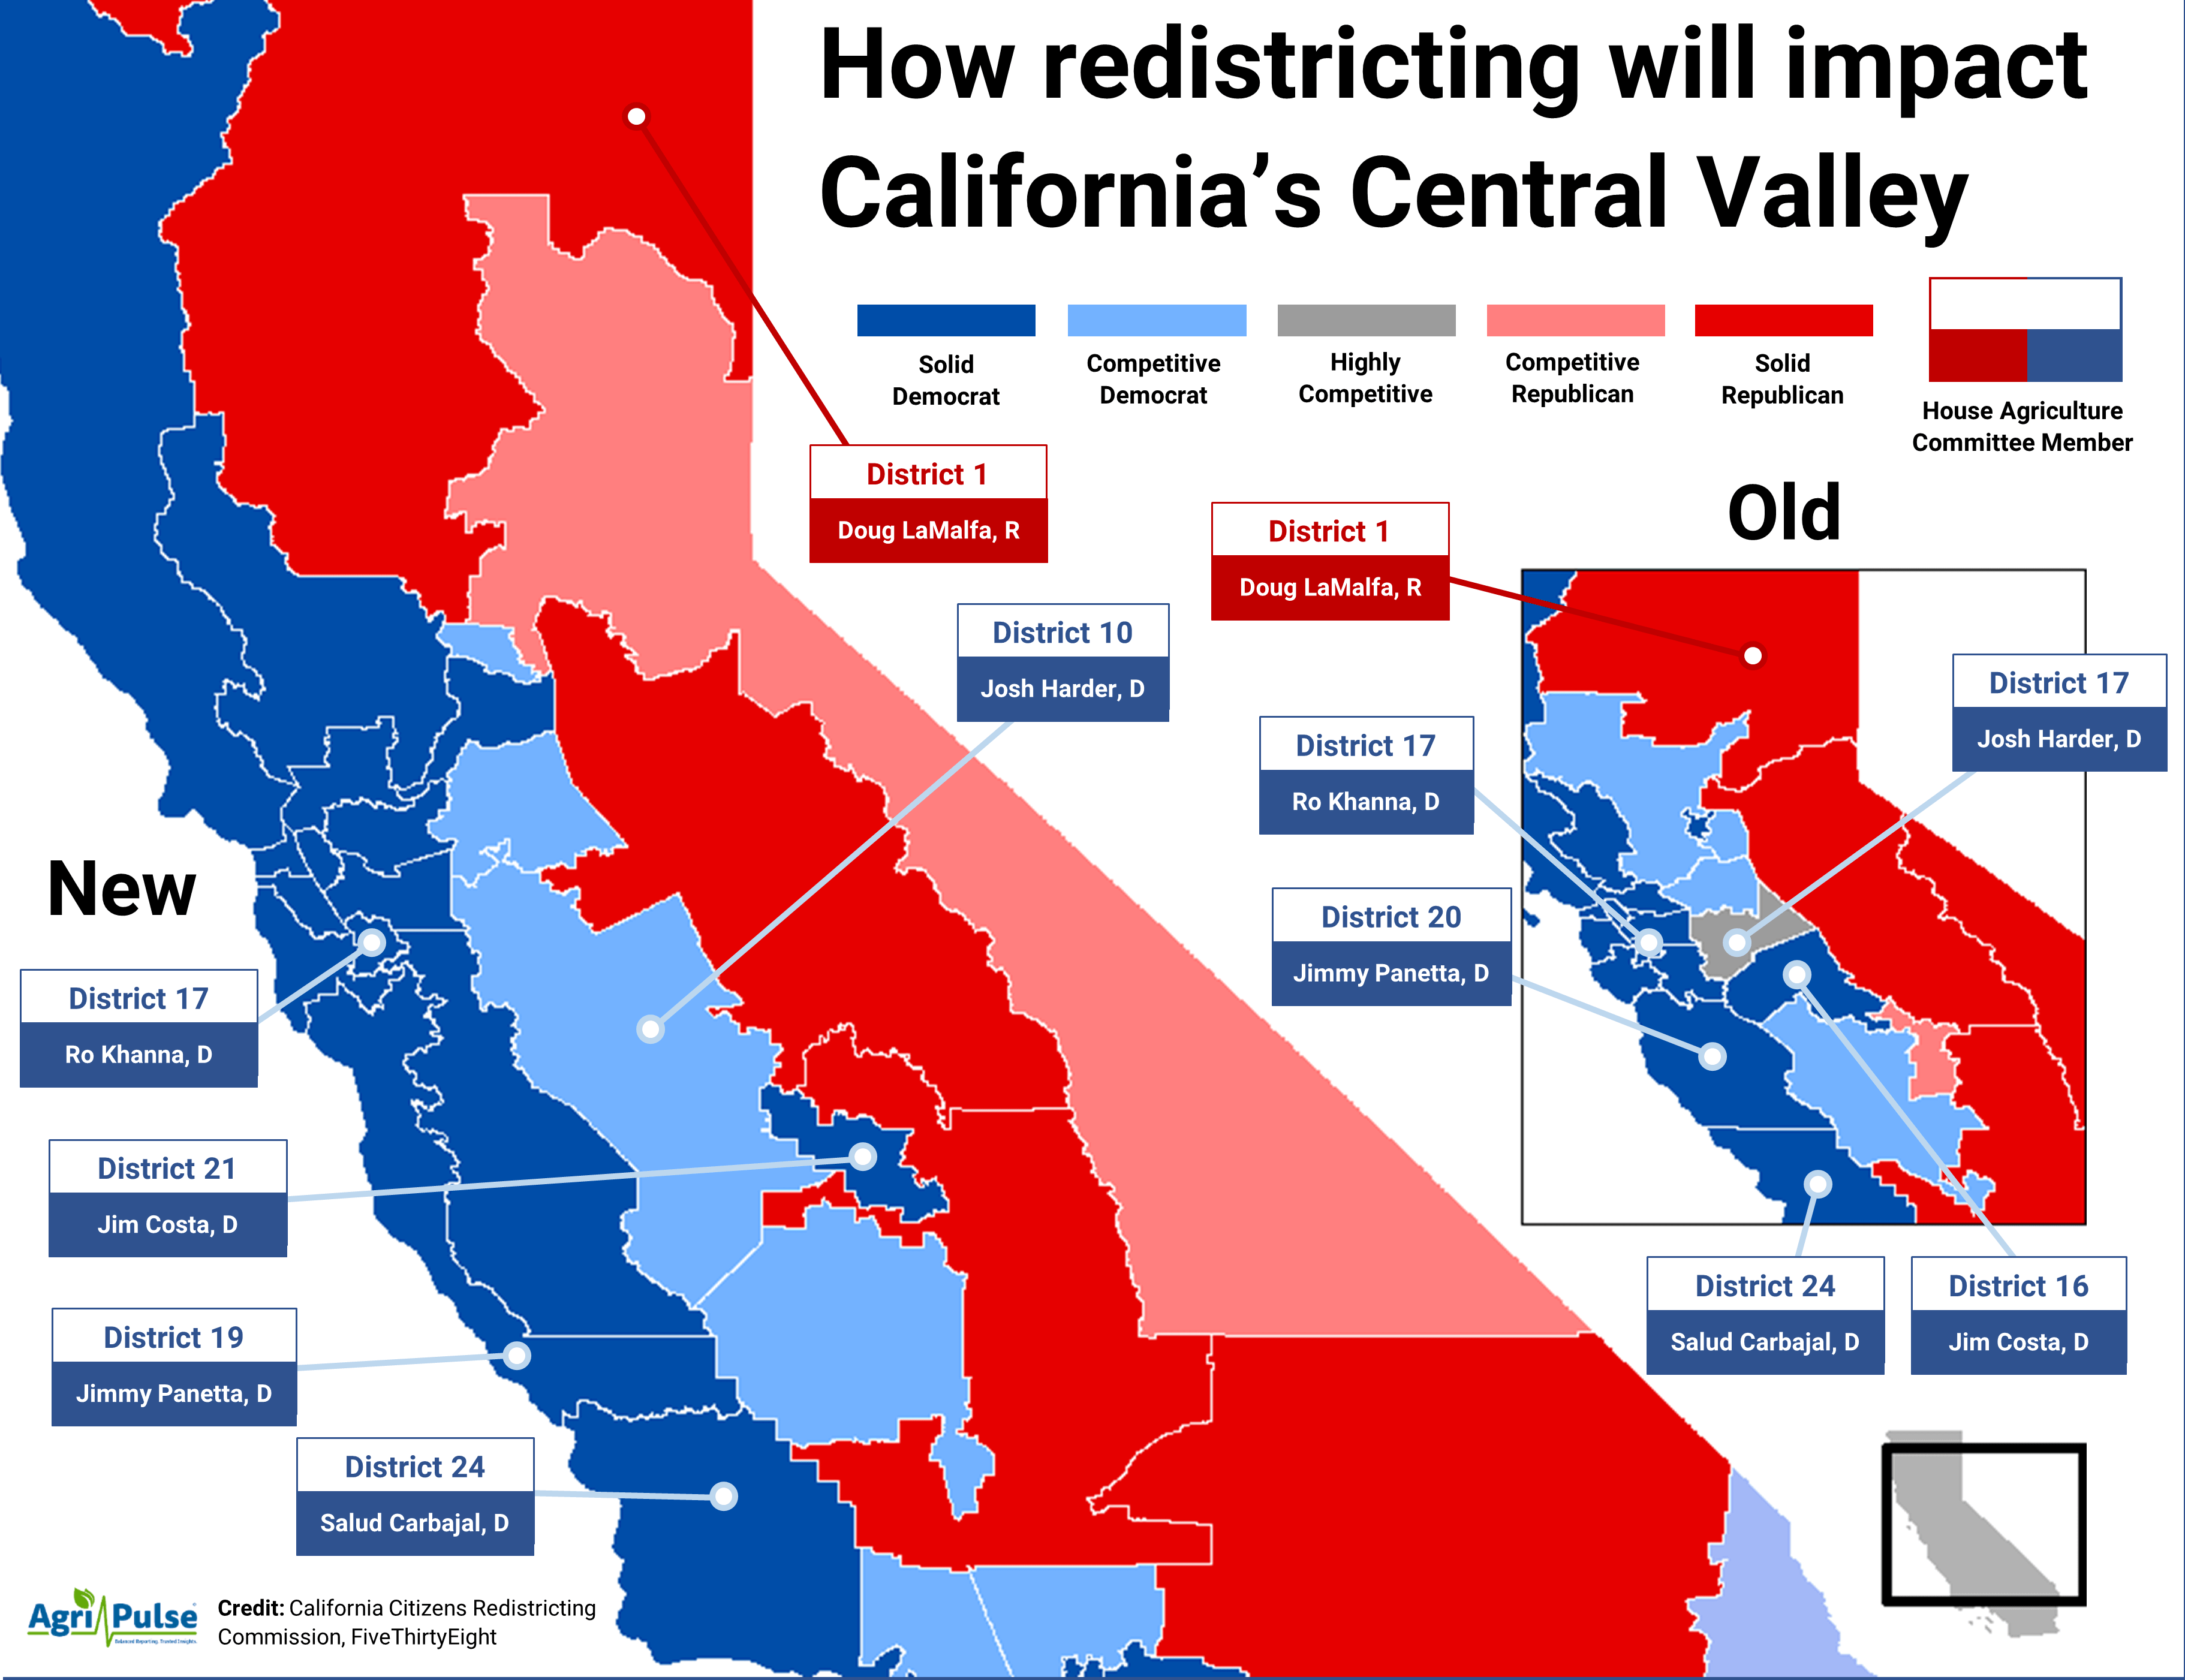 Analysis What redistricting could mean for the current members of the